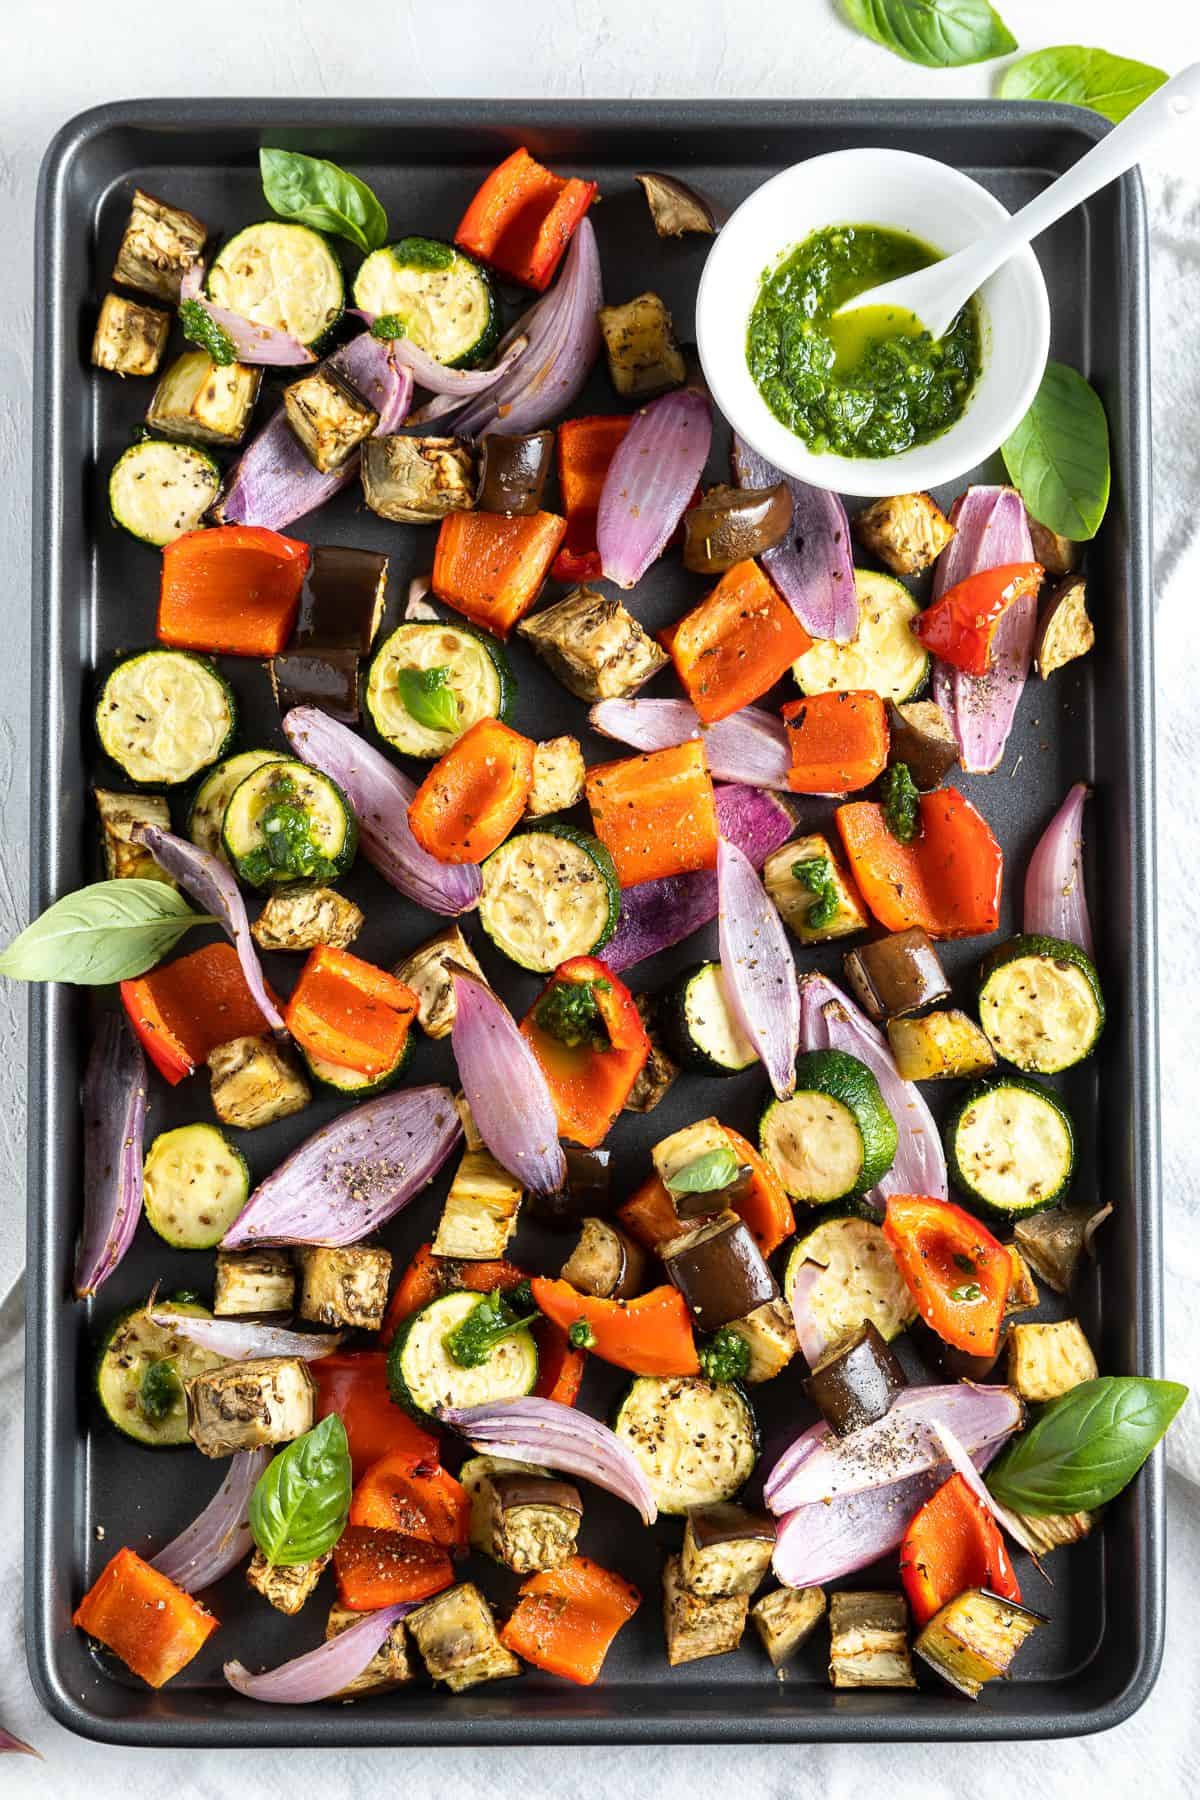 Overhead shot of roasted vegetables on a sheet pan with a small dish of basil oil sitting on the tray.